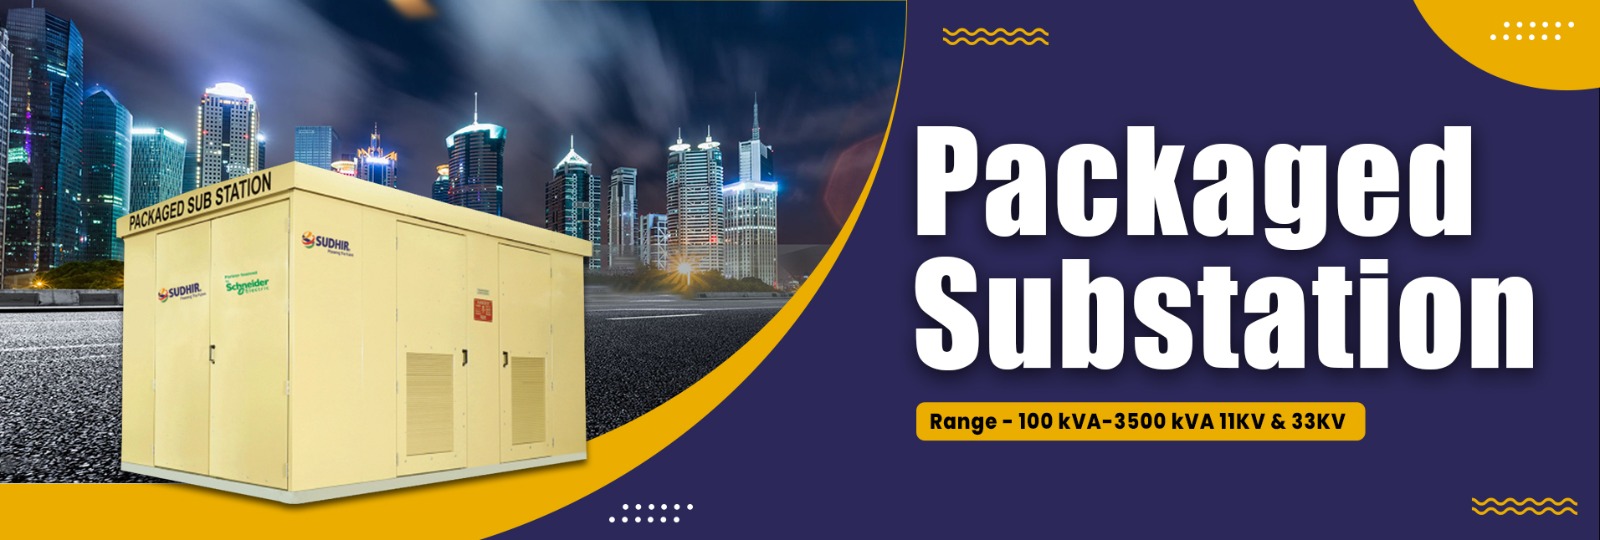 package substation in india